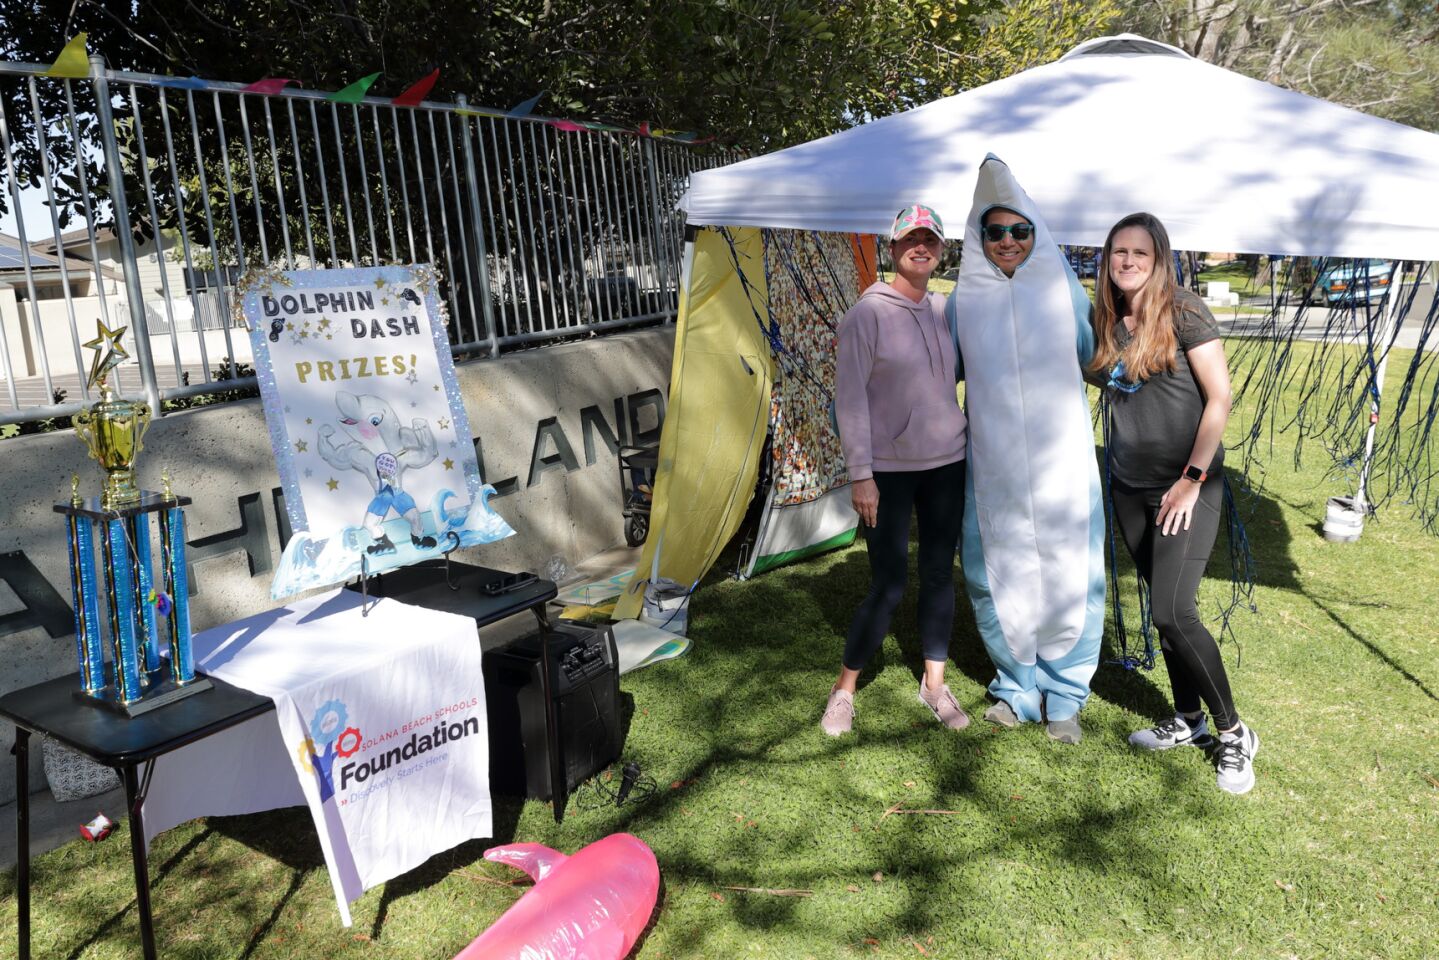 Dad's Club president Aaron Ling (center in dolphin costume) with Dolphin Dash co-chairs Emily Slade (left) and Katie Suel (right)